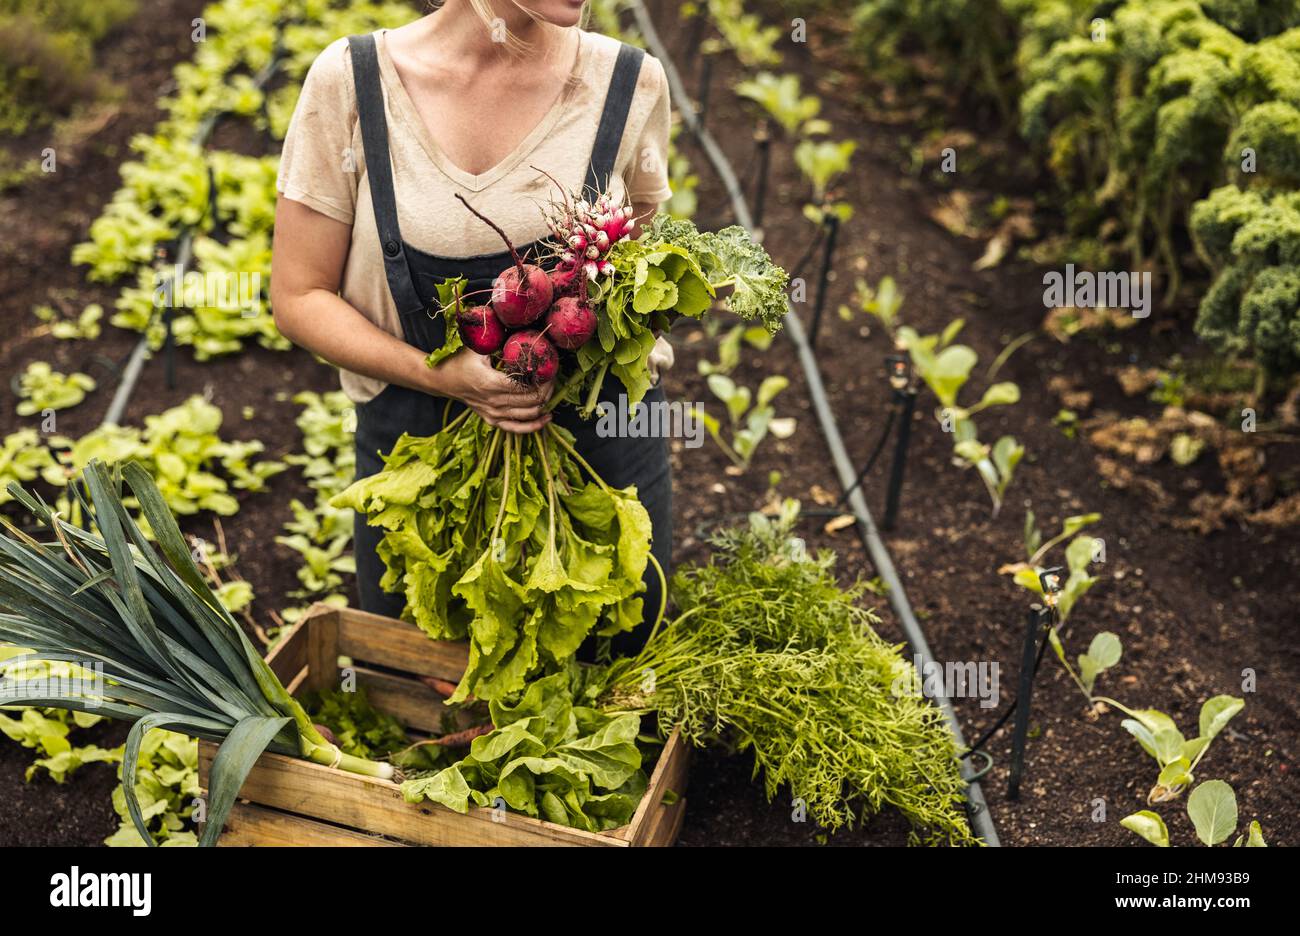 Gardener holding freshly picked vegetables in her organic garden. Self-sufficient female farmer arranging a variety of fresh produce into a crate. Unr Stock Photo